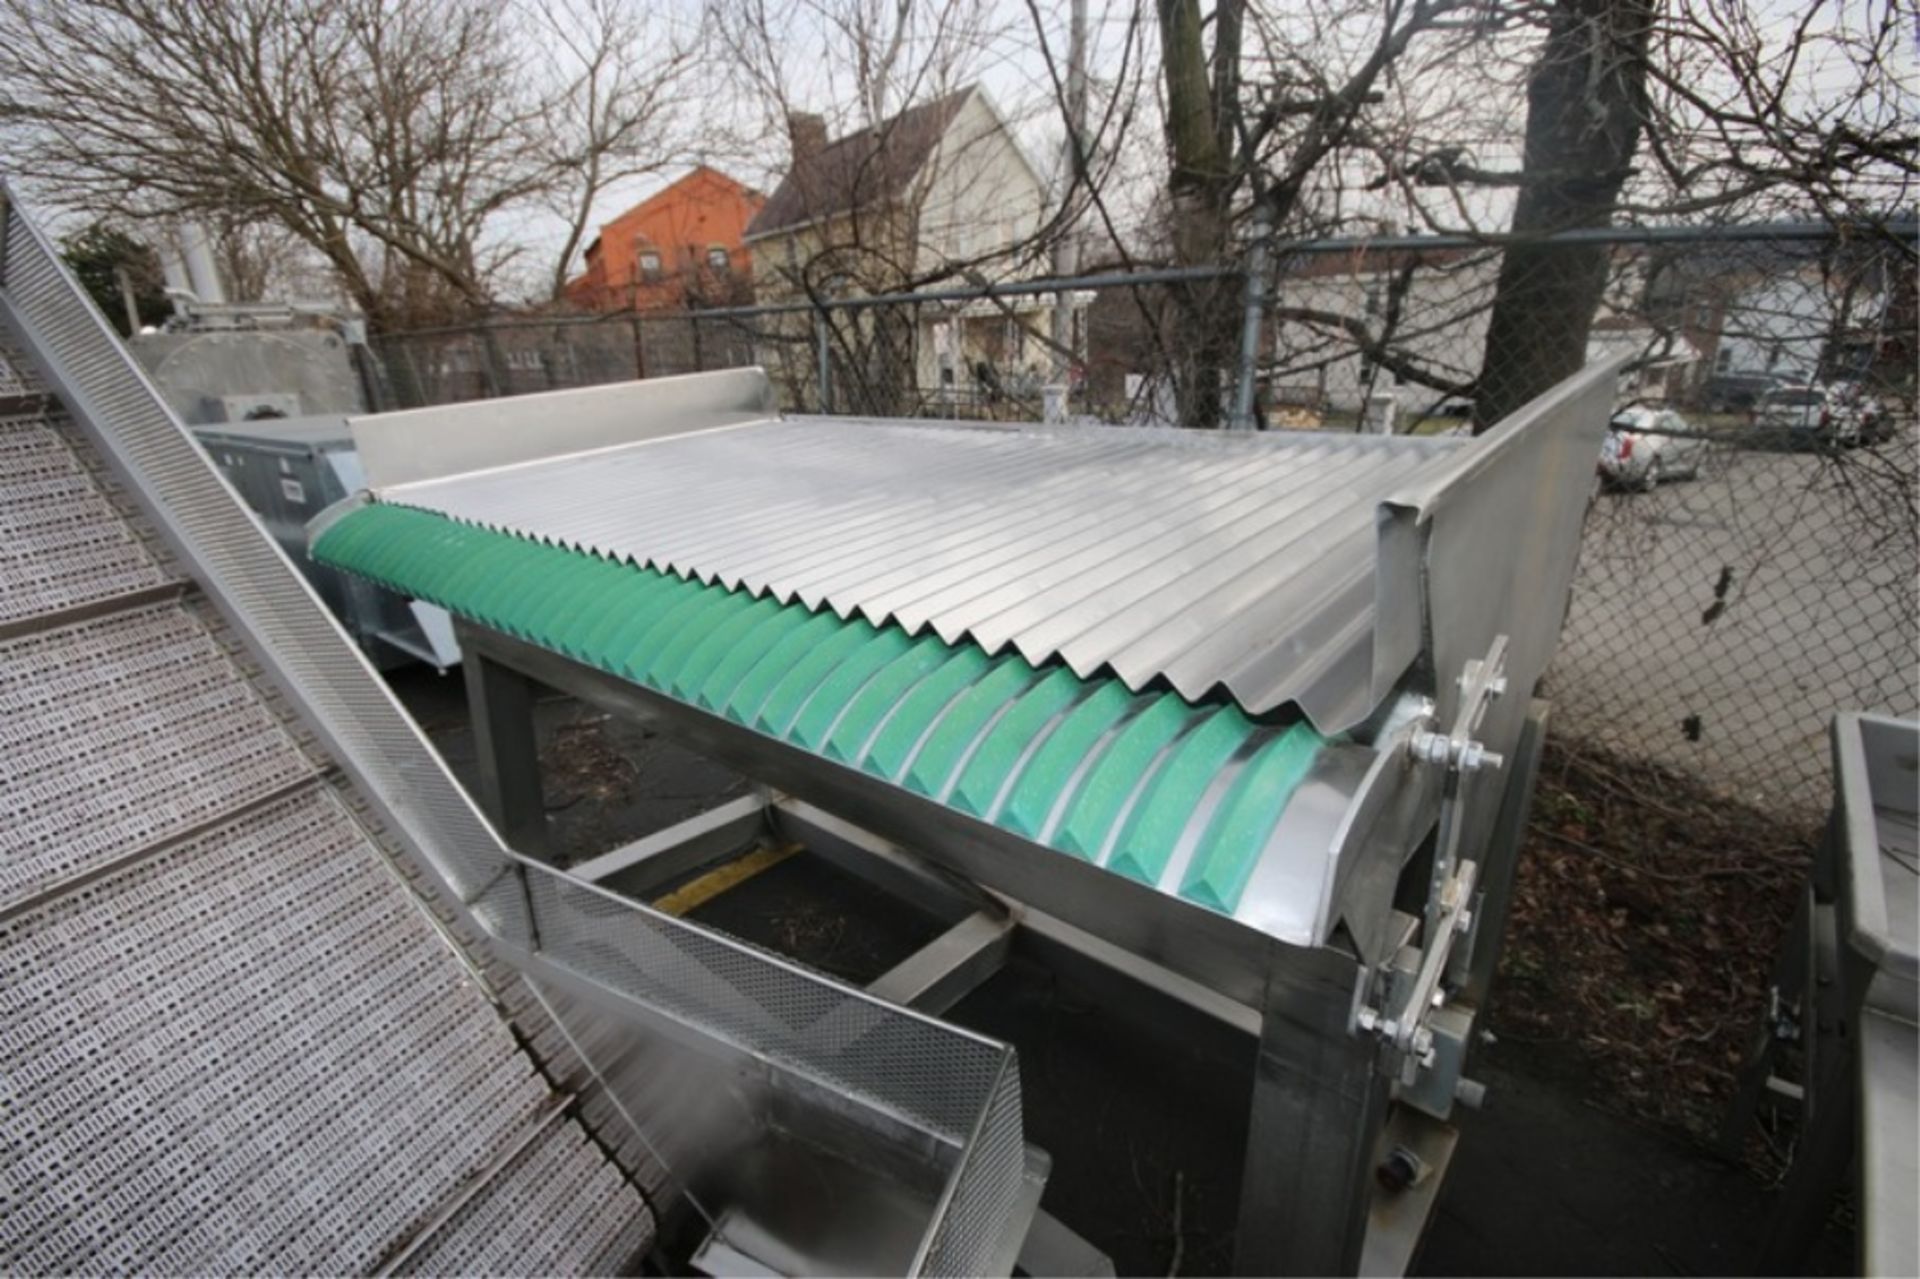 S/S Flume, Overall Dims.: Aprox. 78" L x 43" W x 52" H, Mounted on S/S Frame (INV#68824) (Located at - Image 2 of 5